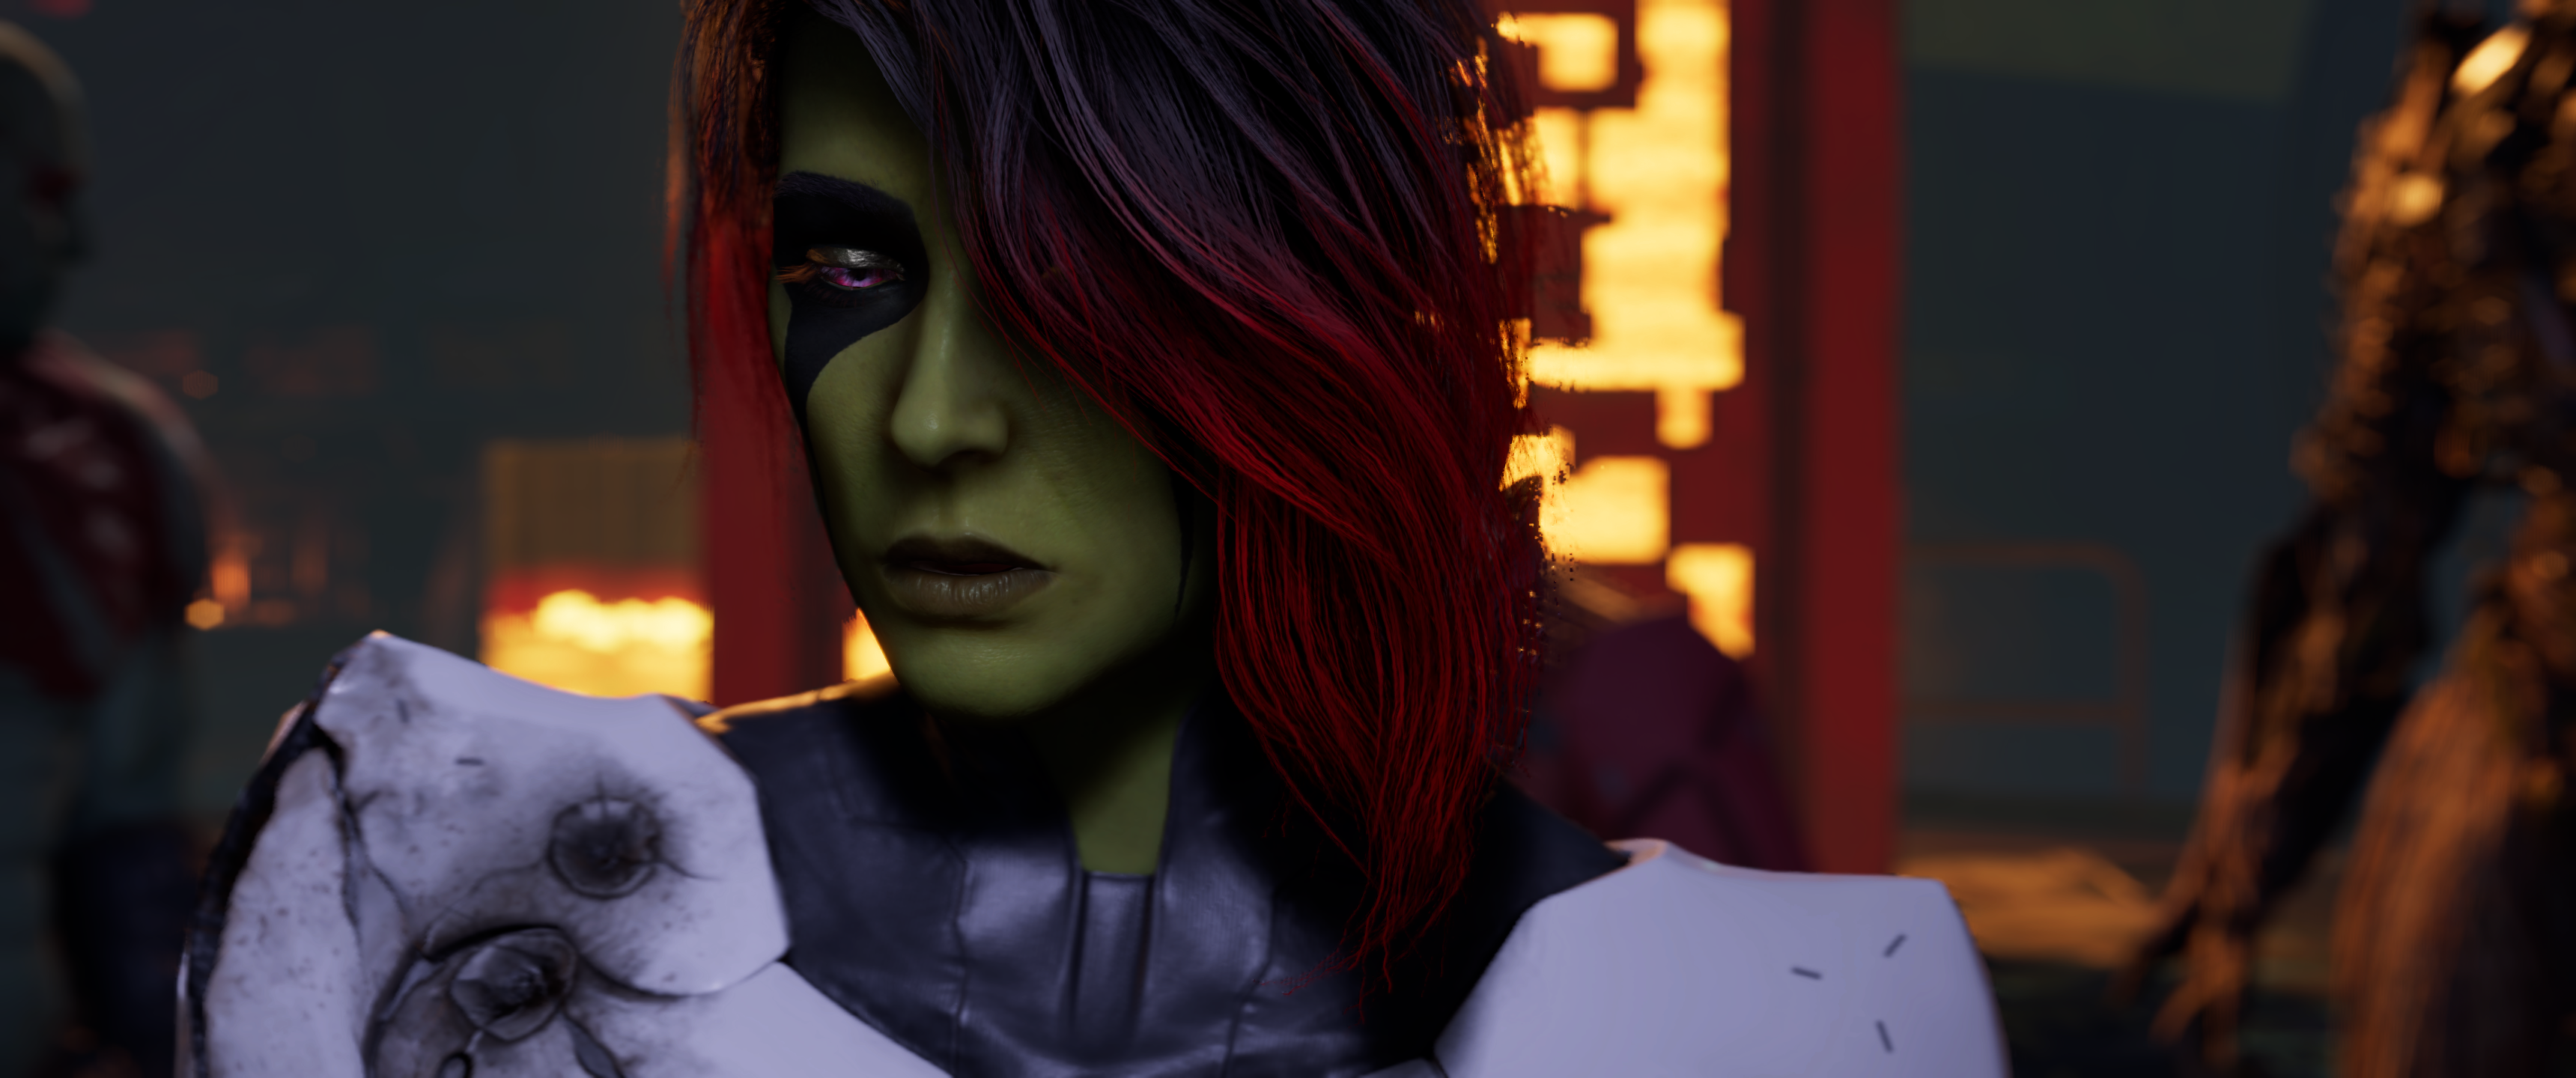 General 3440x1440 Guardians of the Galaxy (Game) video game characters aliens universe Gamora  Marvel Comics